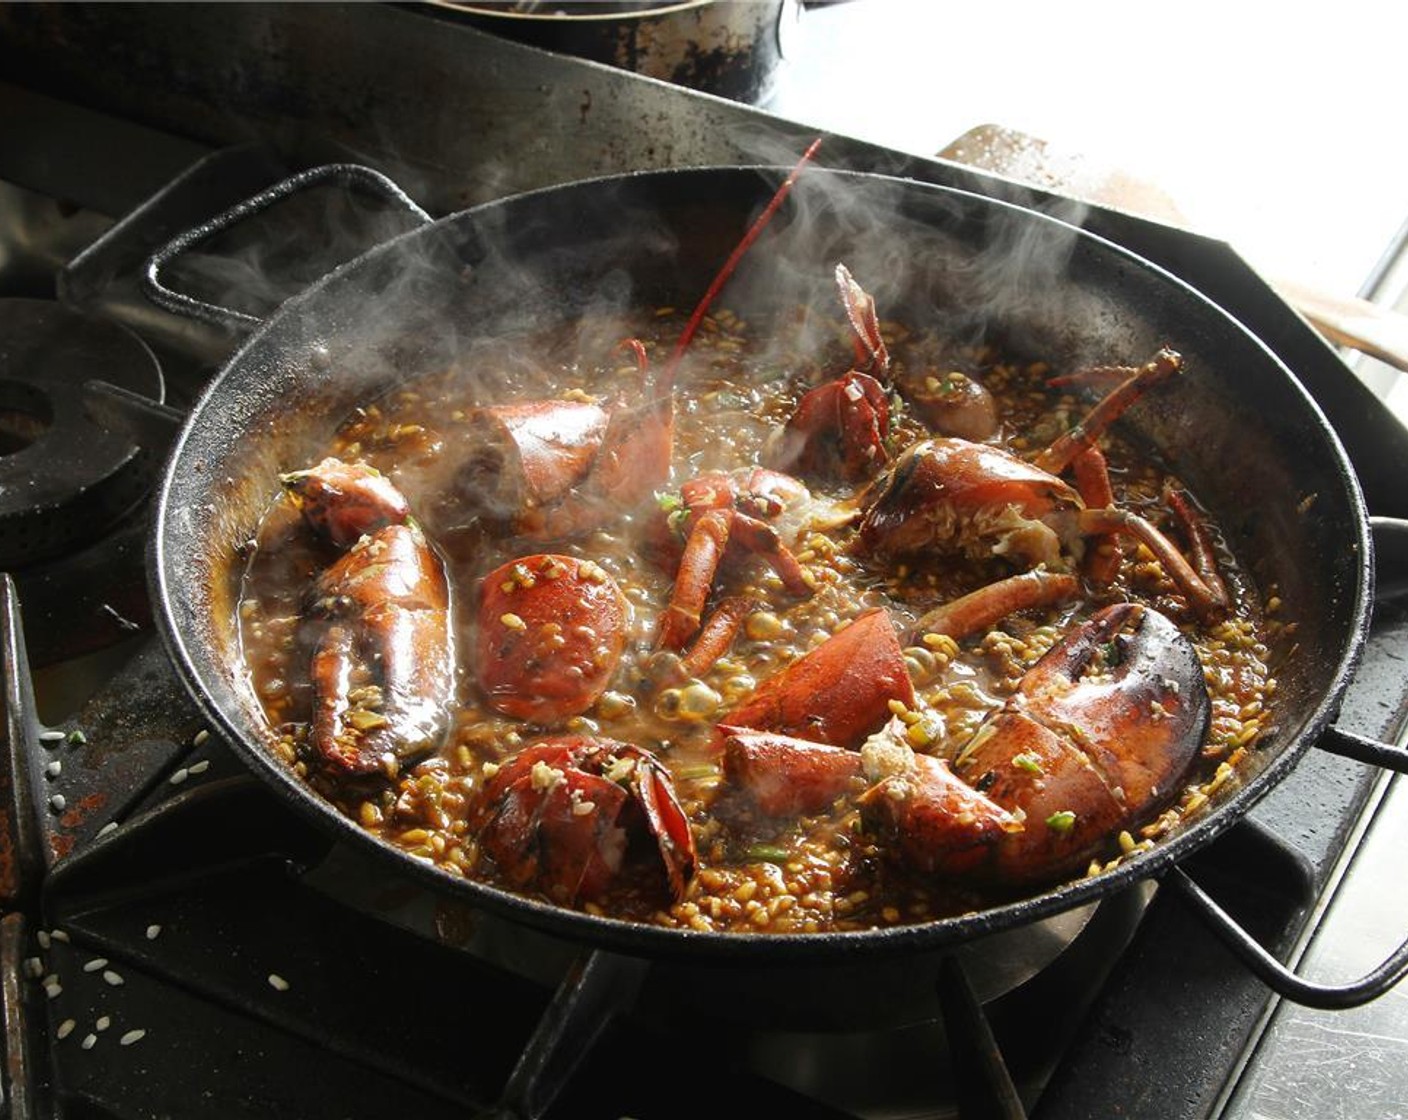 step 20 Transfer the lobster back in the paella. Once almost dry, add some more lobster stock and place in a 350 degrees F (180 degrees C) oven for 5 minutes. Check the cooking point of the rice, it needs to be al dente.